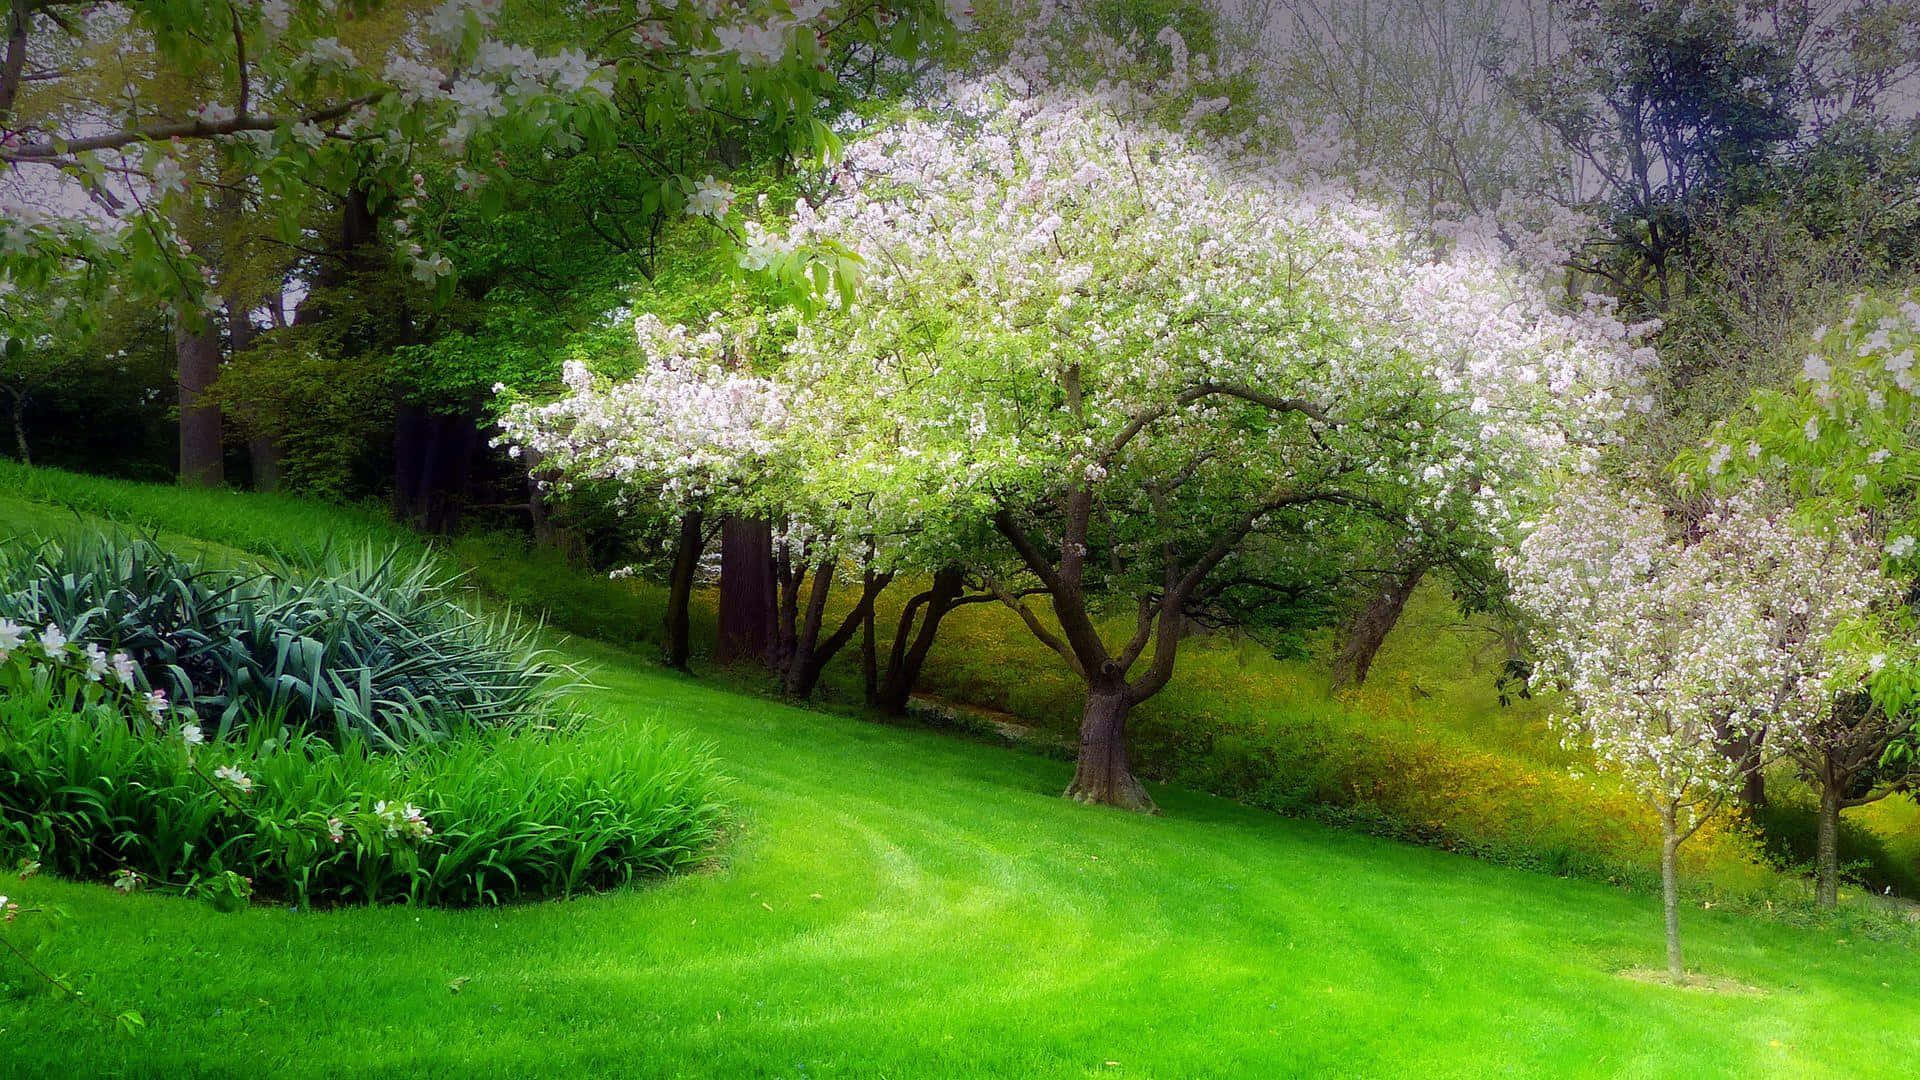 Enjoy nature's beauty with this green tree background